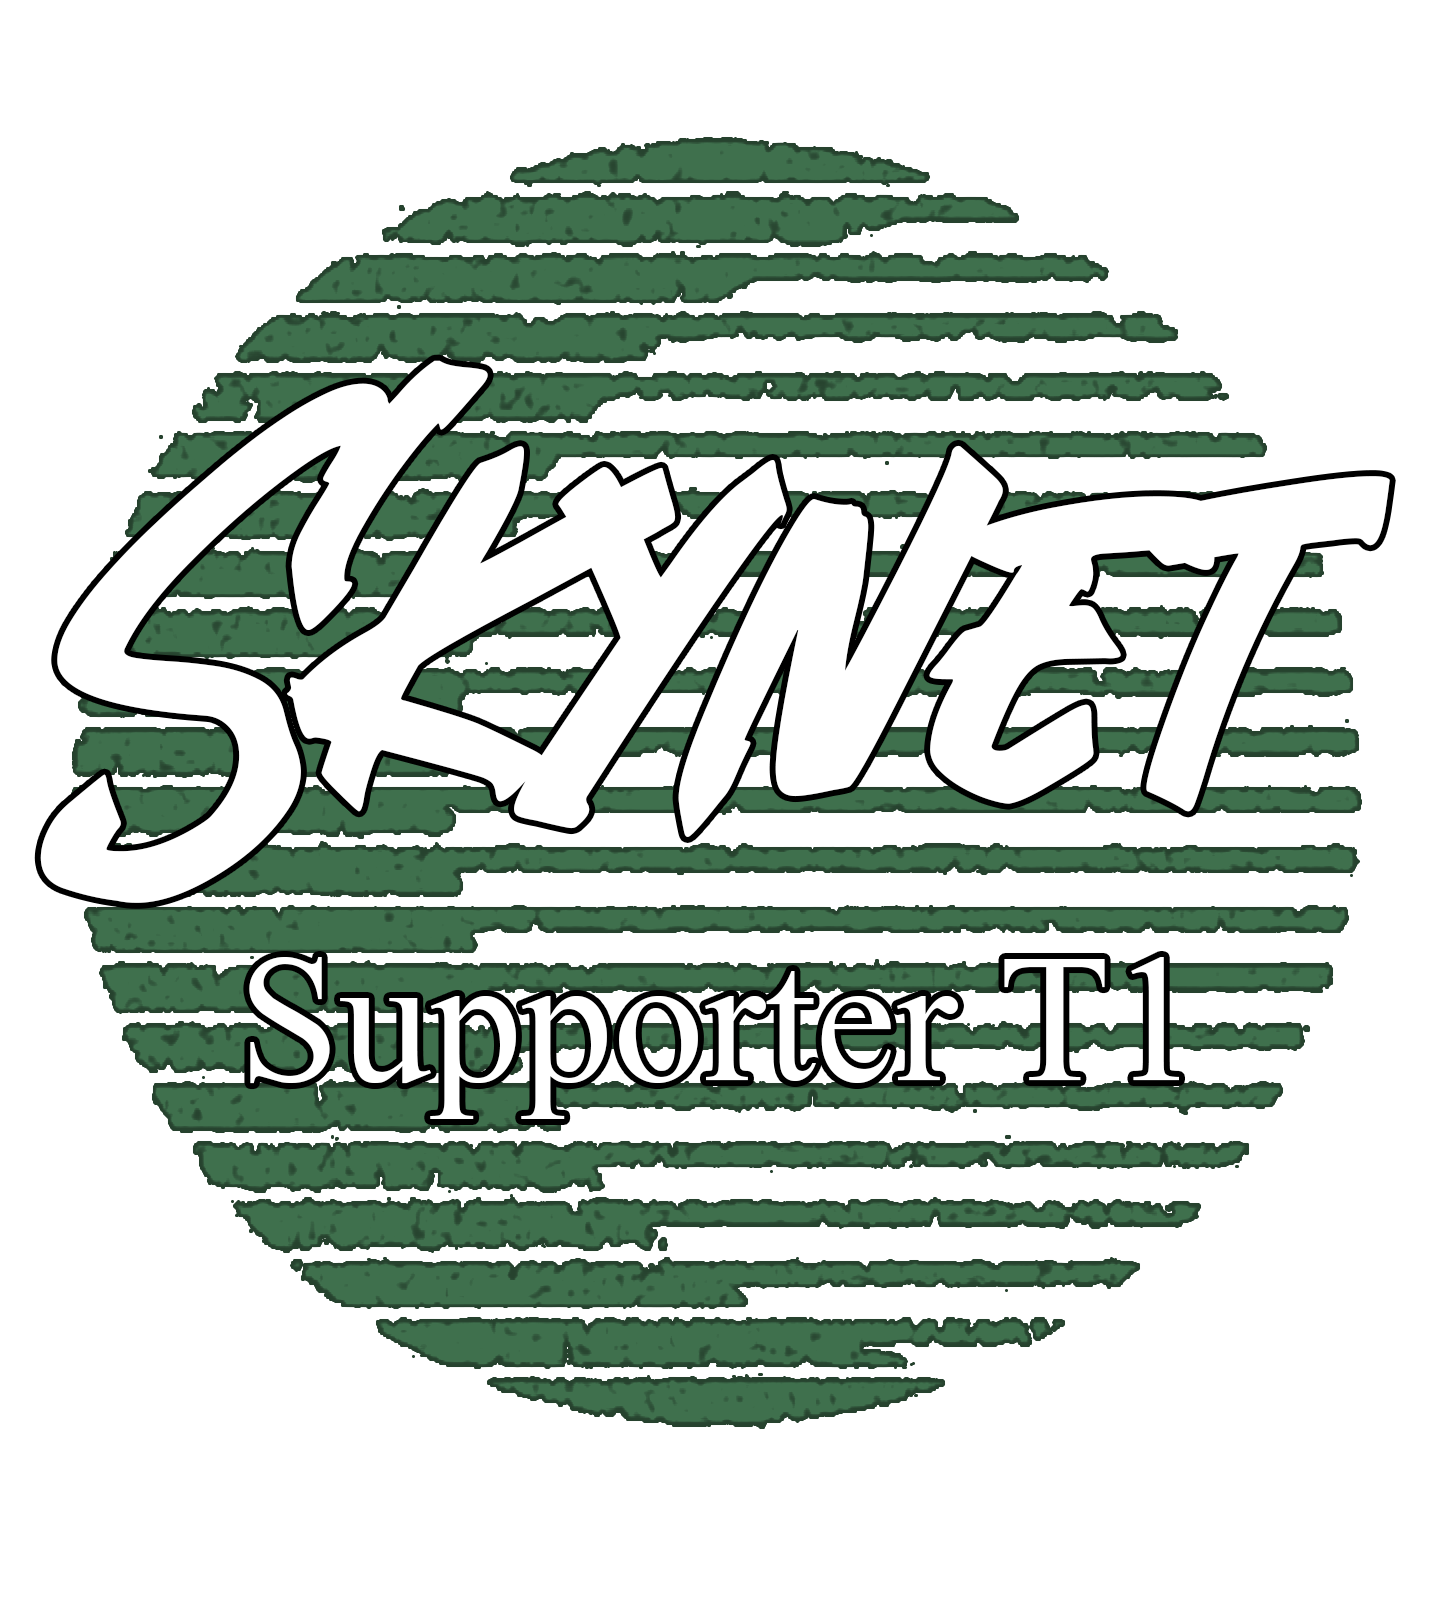 Supporter - T1